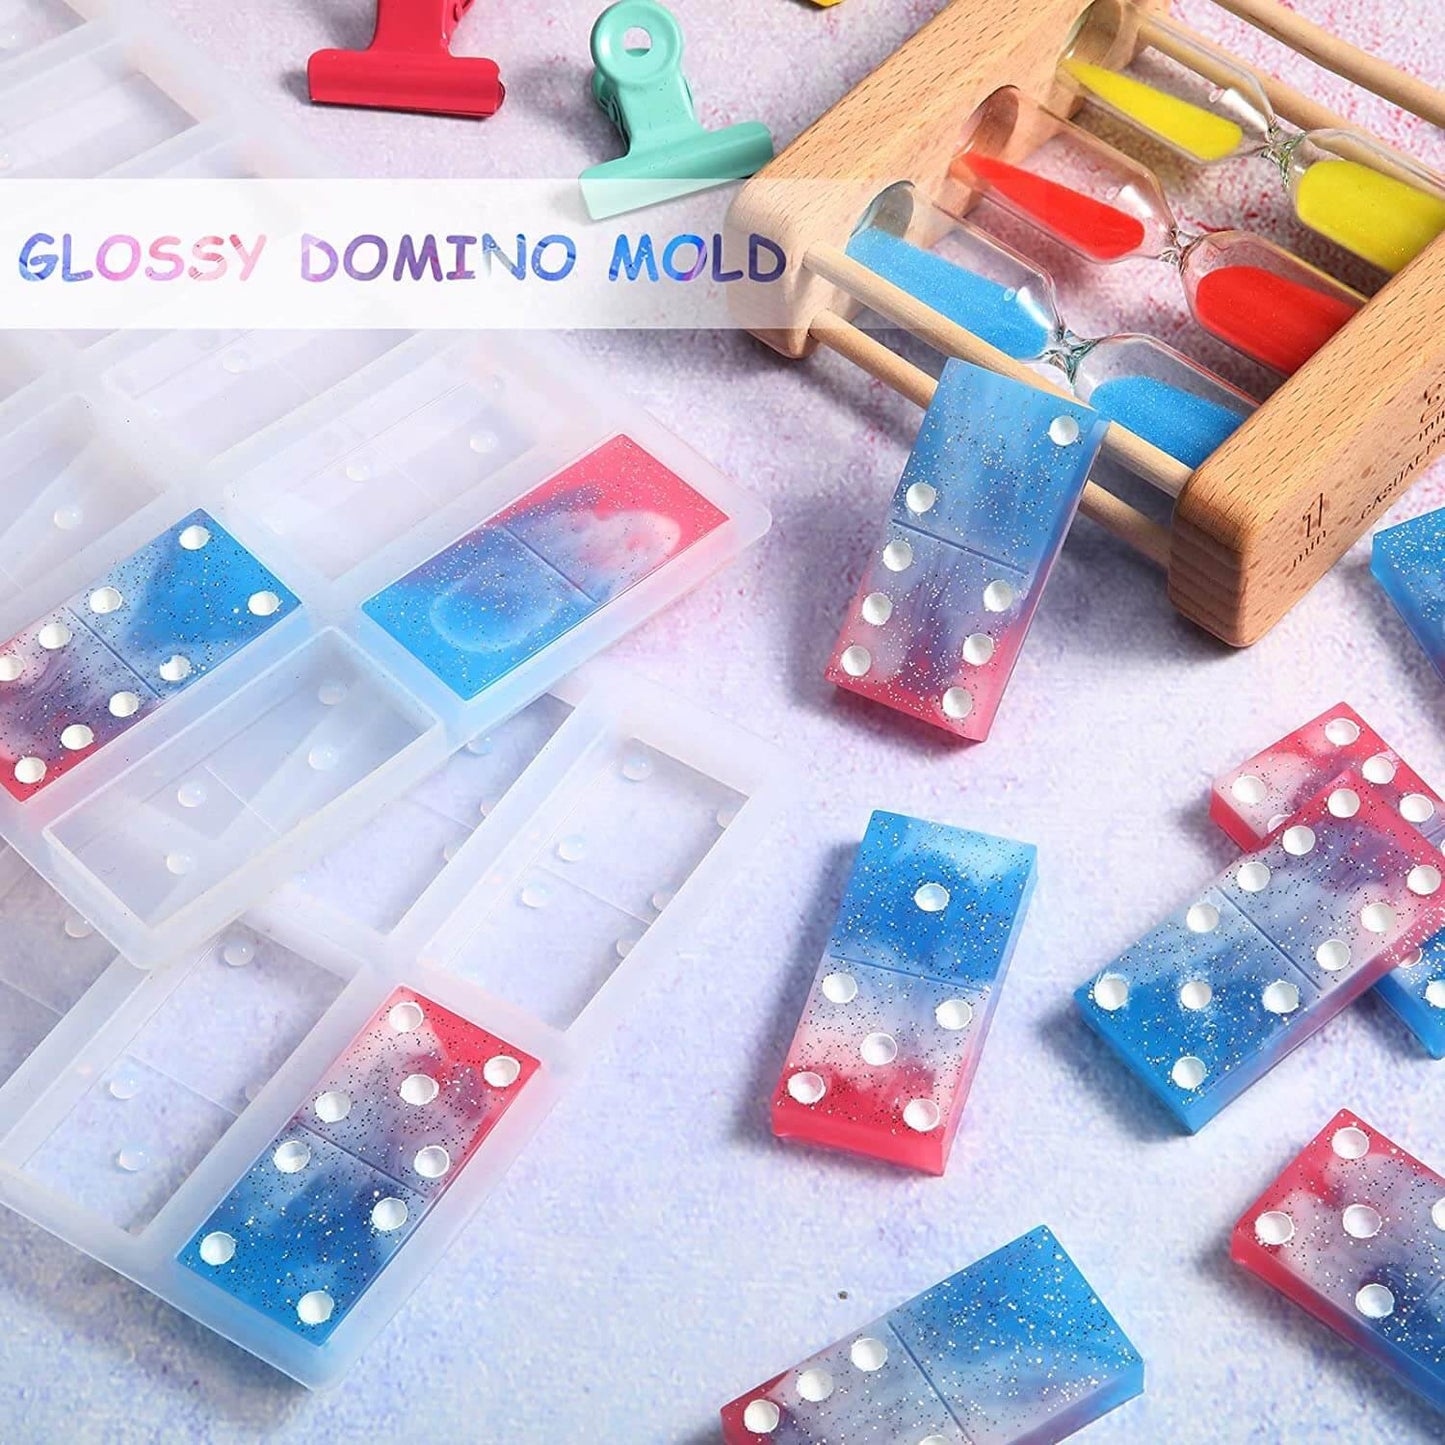 Domino Molds for Resin Casting, Resin Dominoes Molds Set with Craft Storage  Resin Tray Molds, Dot Domino Molds, Acrylic Paints and Paintbrushes for DIY  Resin Domino Games, Instructions Included price in Saudi